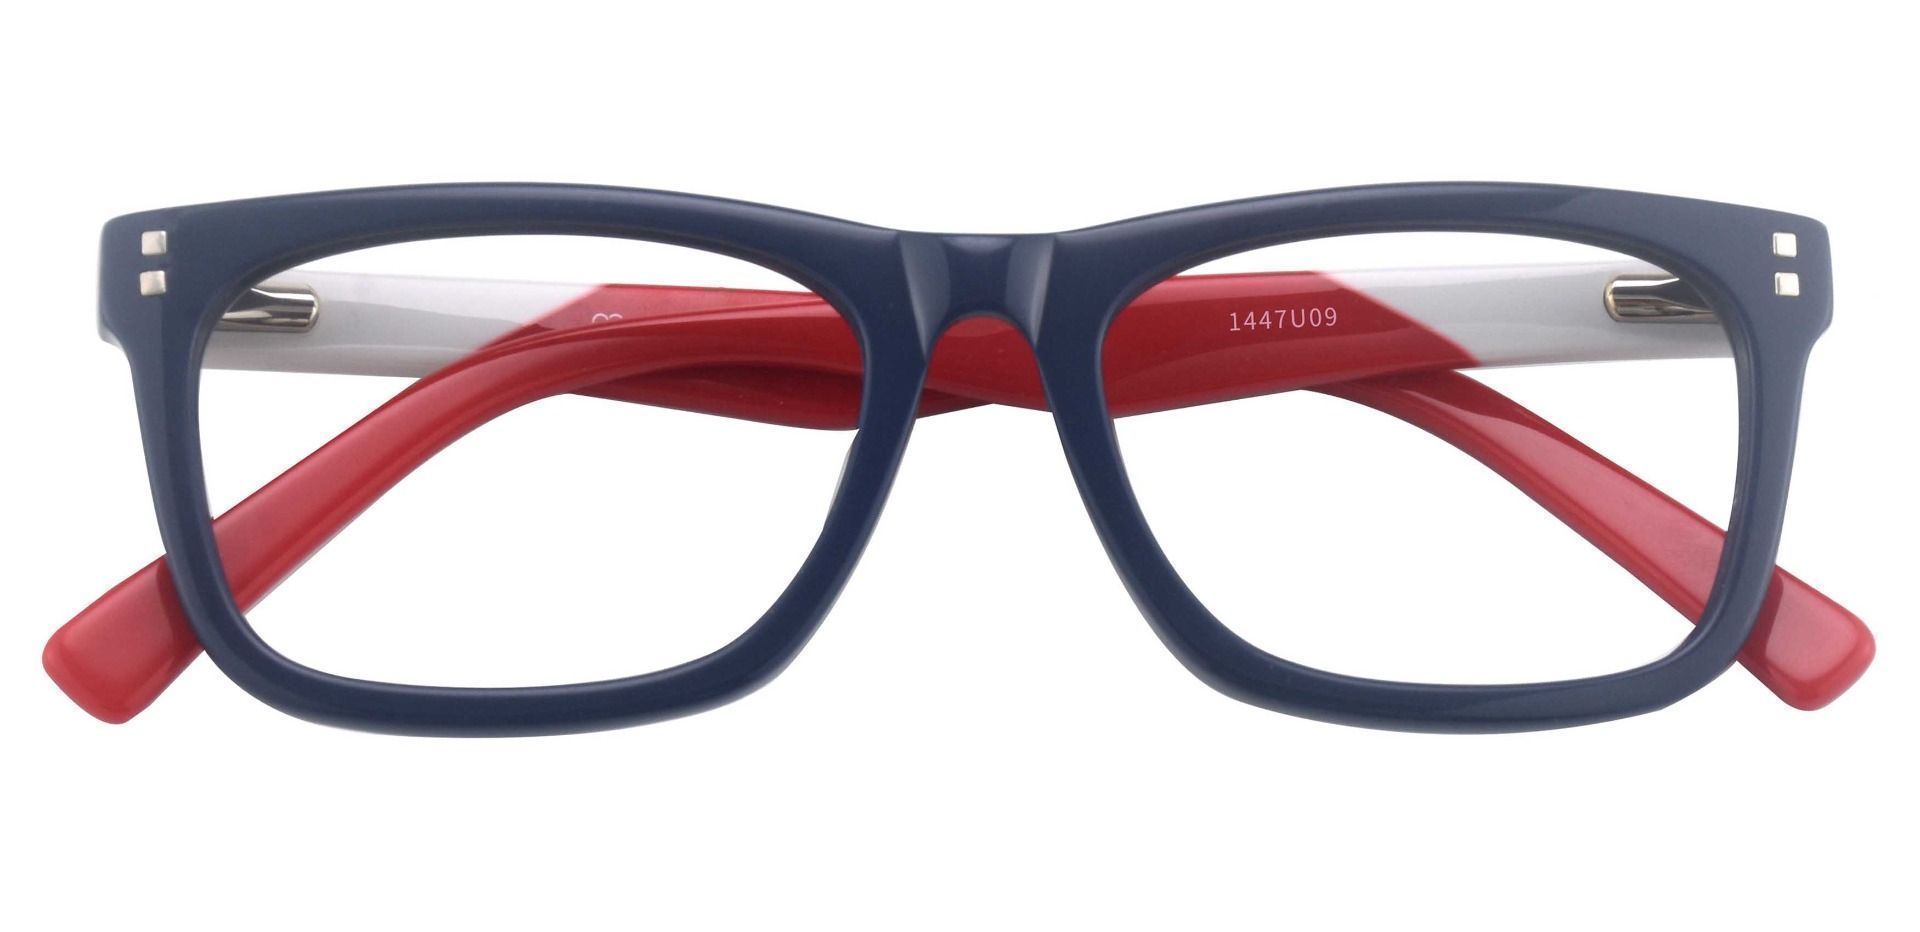 Harbor Rectangle Progressive Glasses - The Frame Is Blue And Red